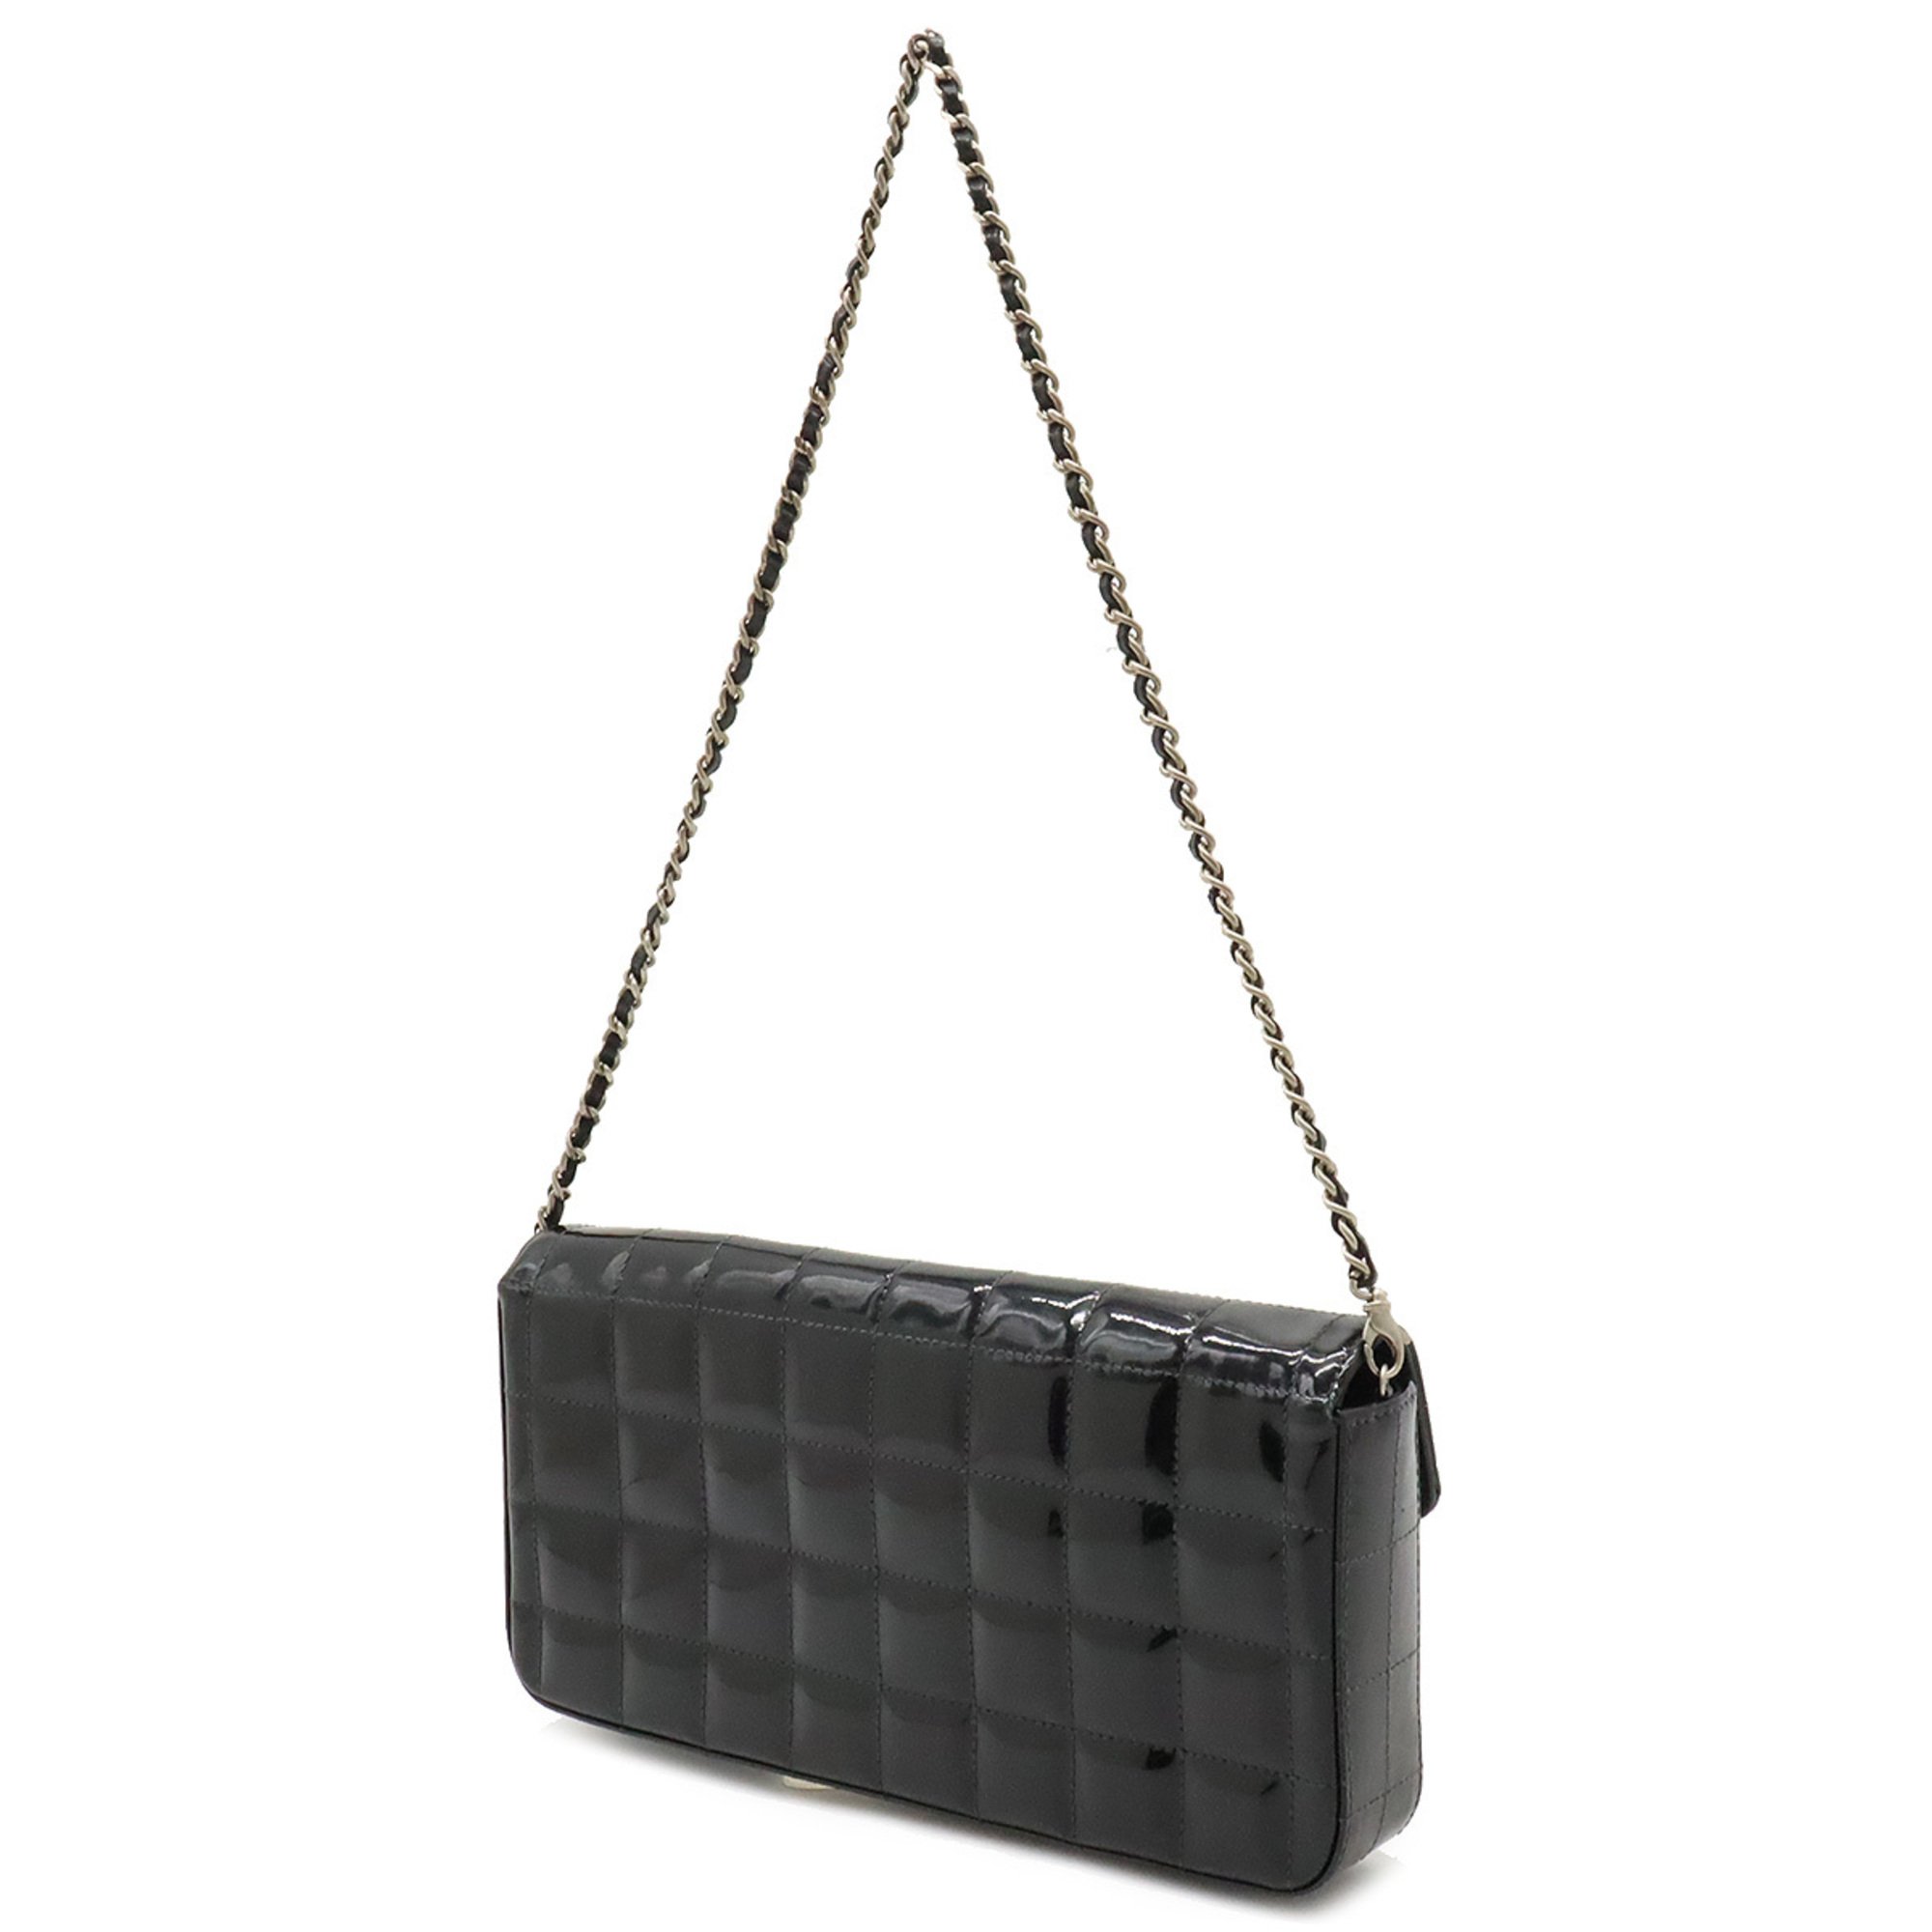 CHANEL Chocolate Bar Coco Mark Chain Shoulder Bag Patent Leather Black